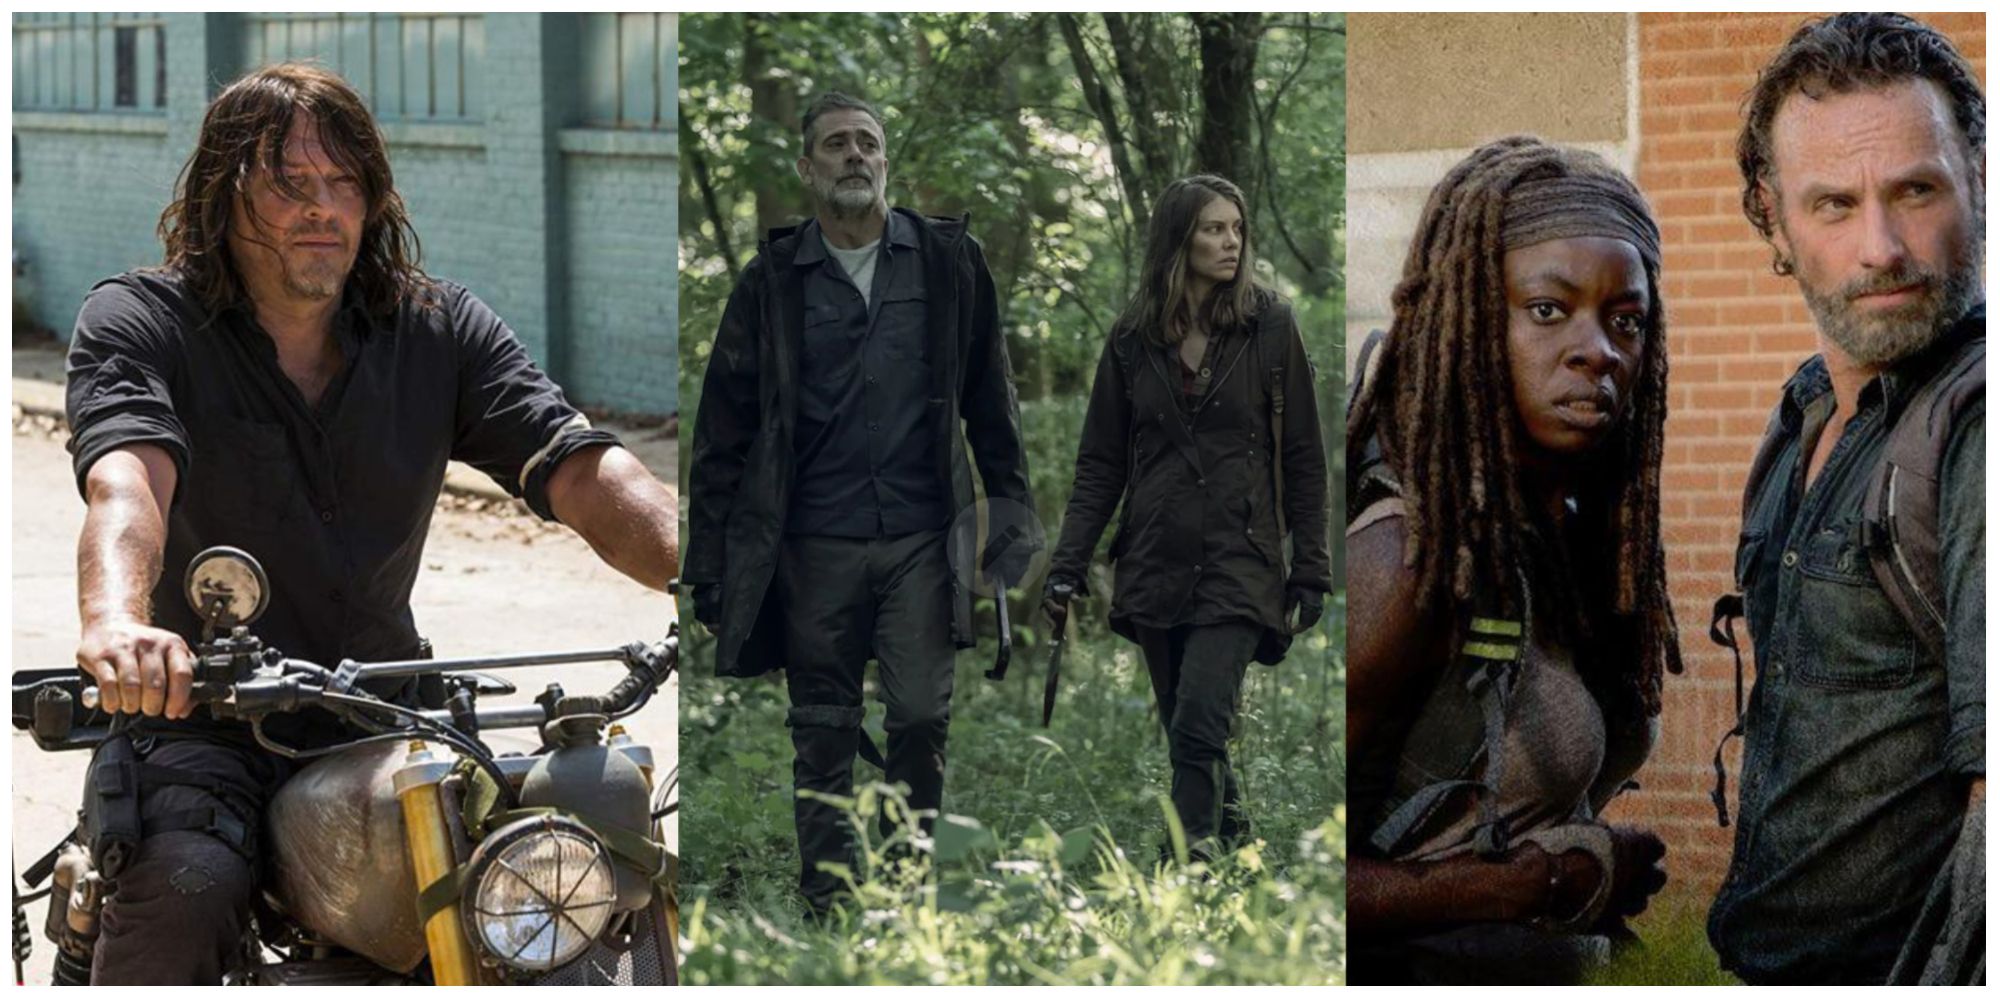 Daryl Dixon, Maggie and Negan, and Rick and Michonne in The Walking Dead spin-offs